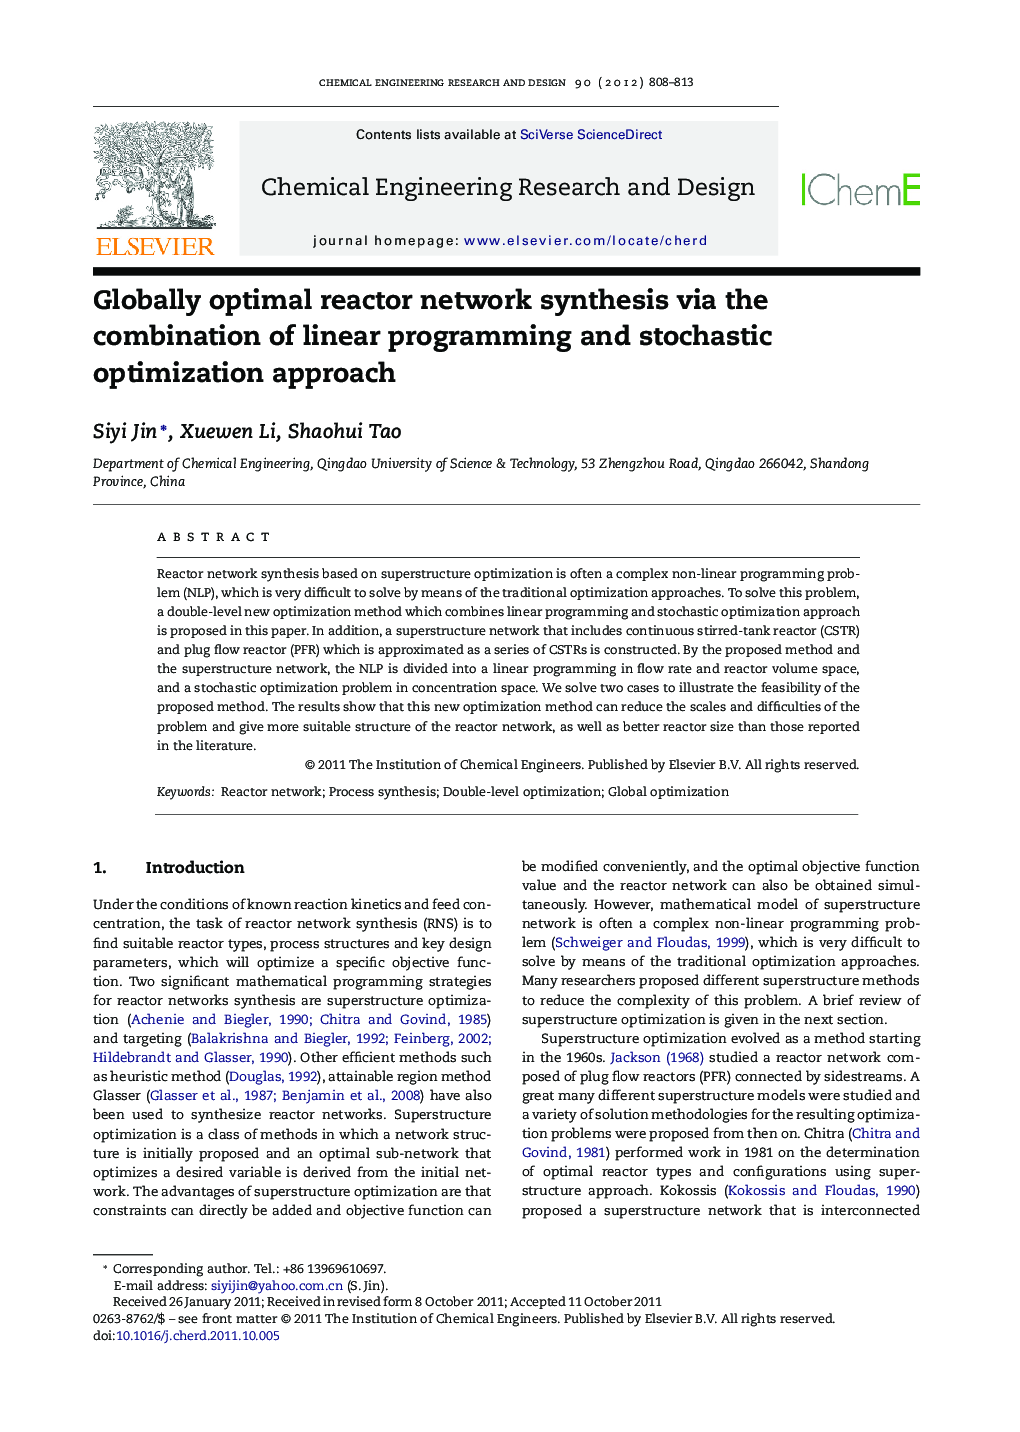 Globally optimal reactor network synthesis via the combination of linear programming and stochastic optimization approach